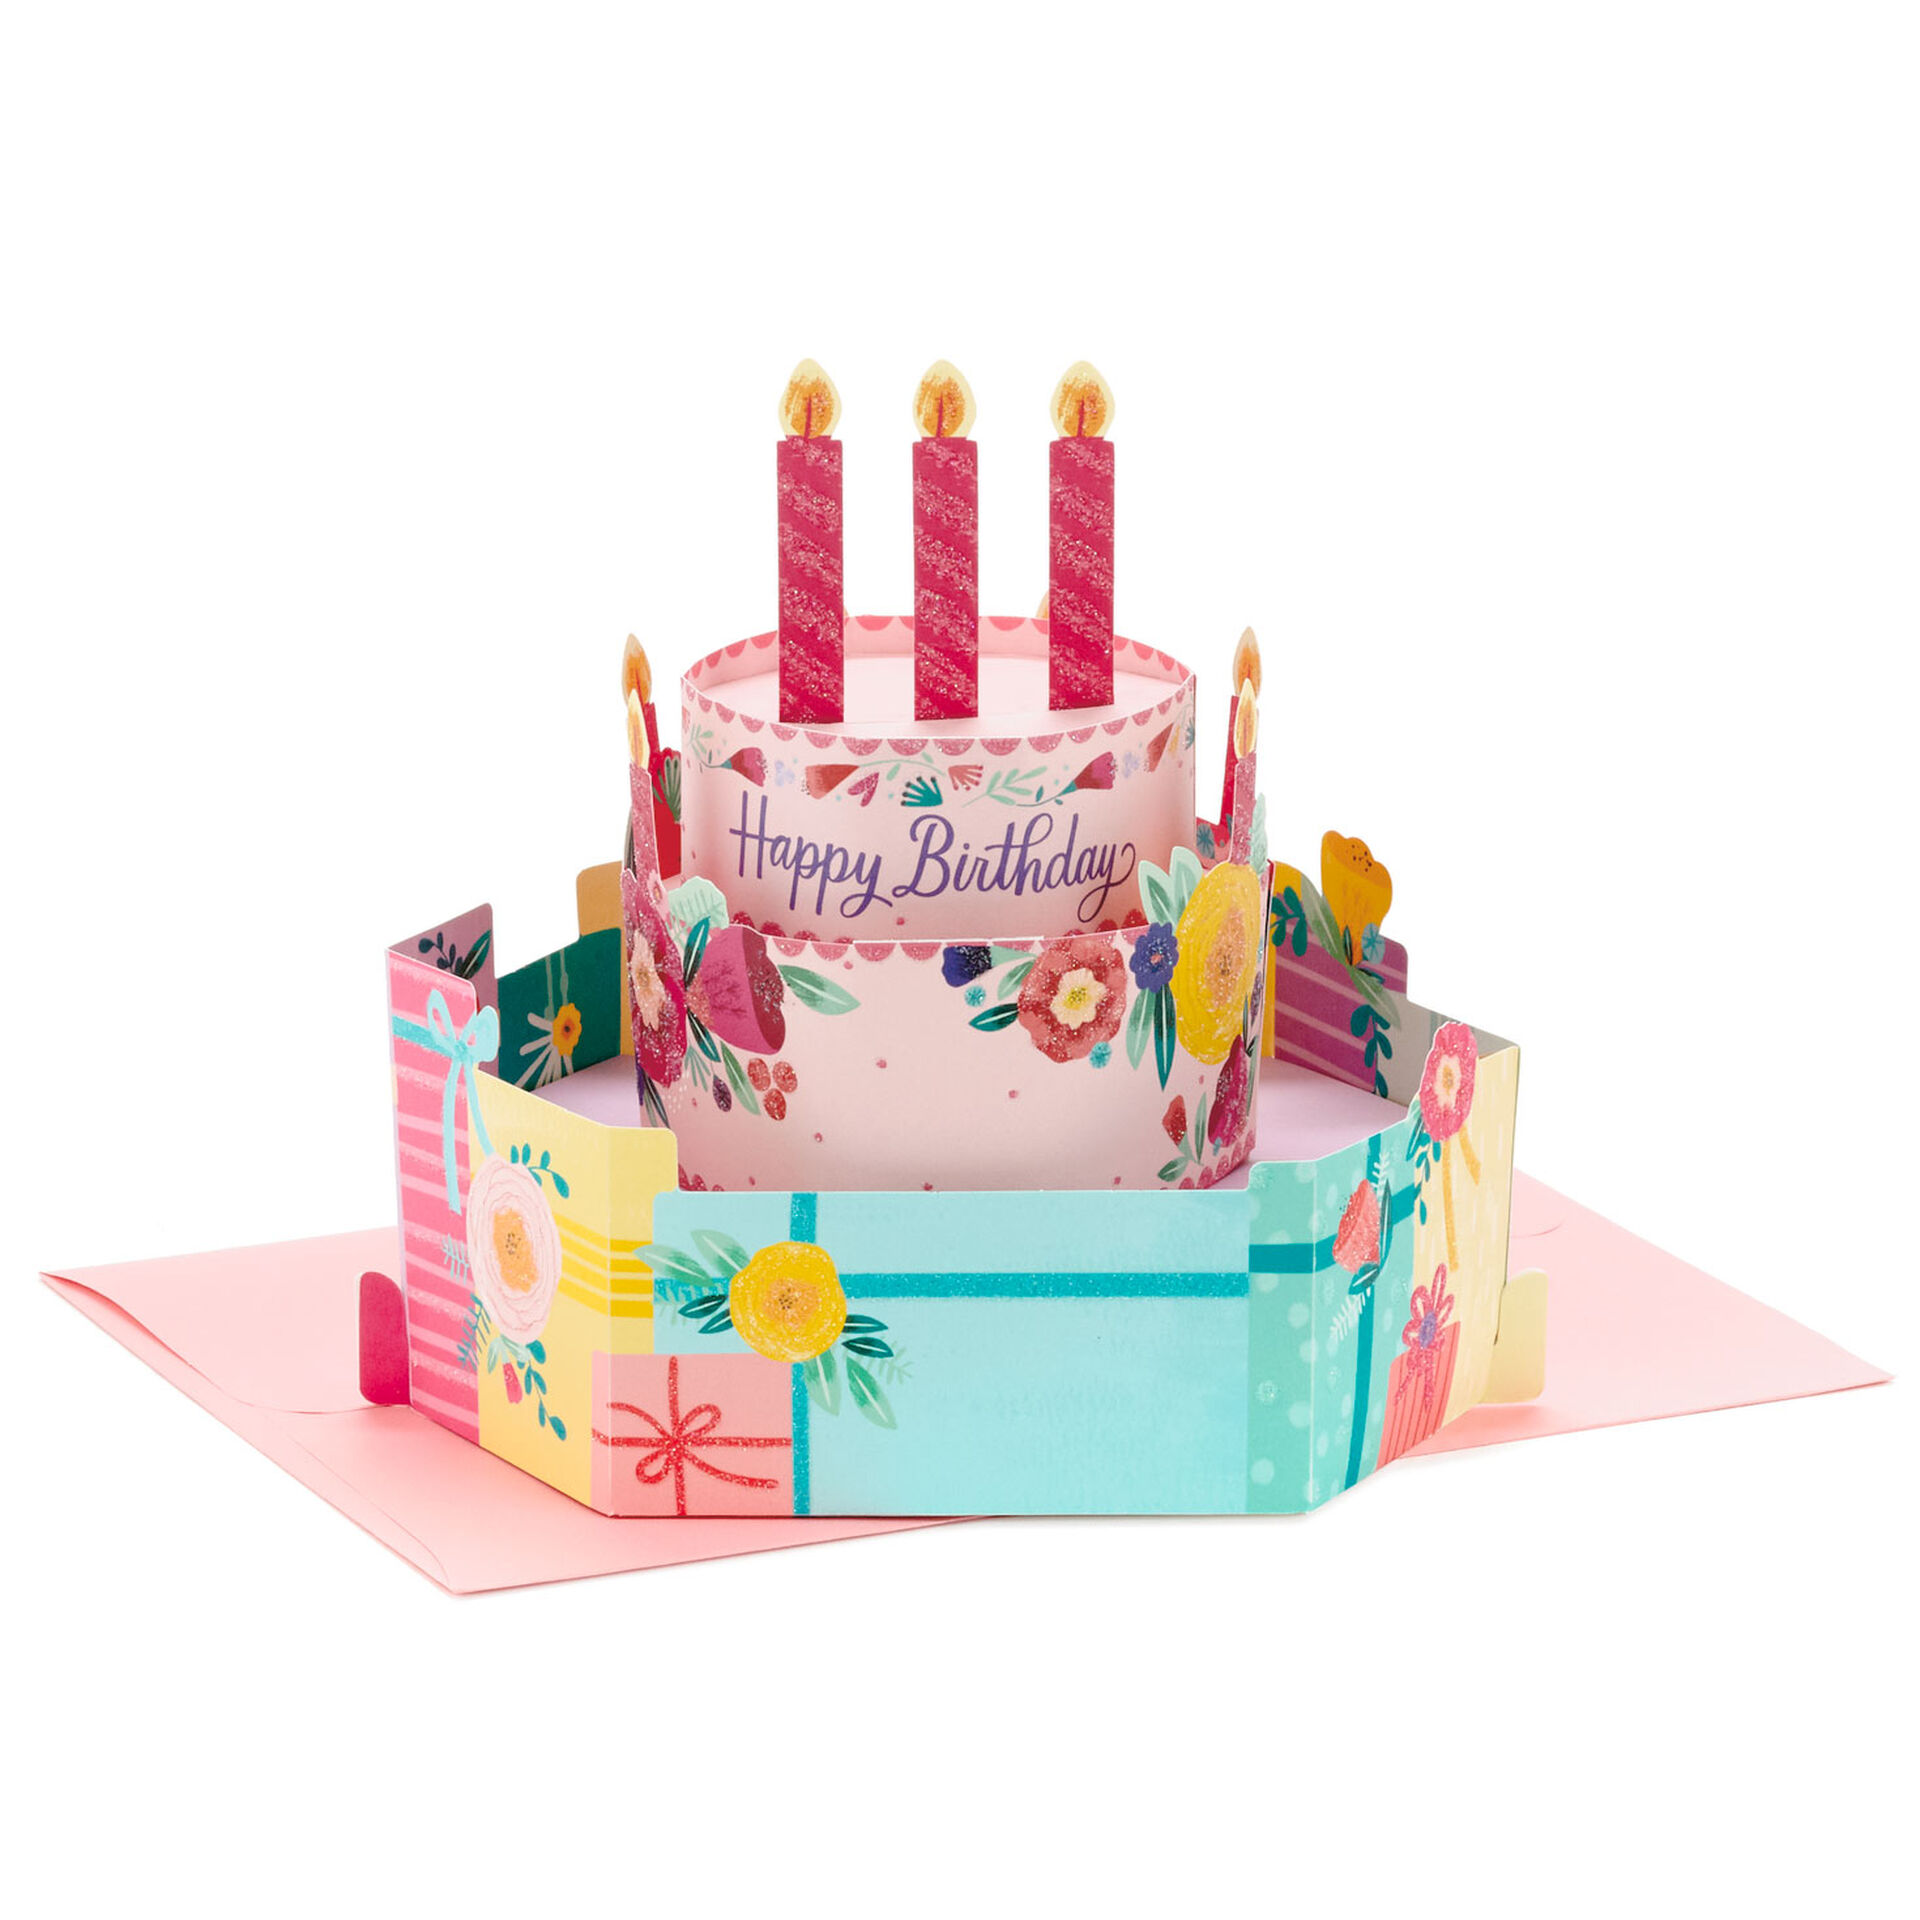 Cake-Flowers-&-Gifts-3D-PopUp-Birthday-Card-for-Her_799WDR1100_02